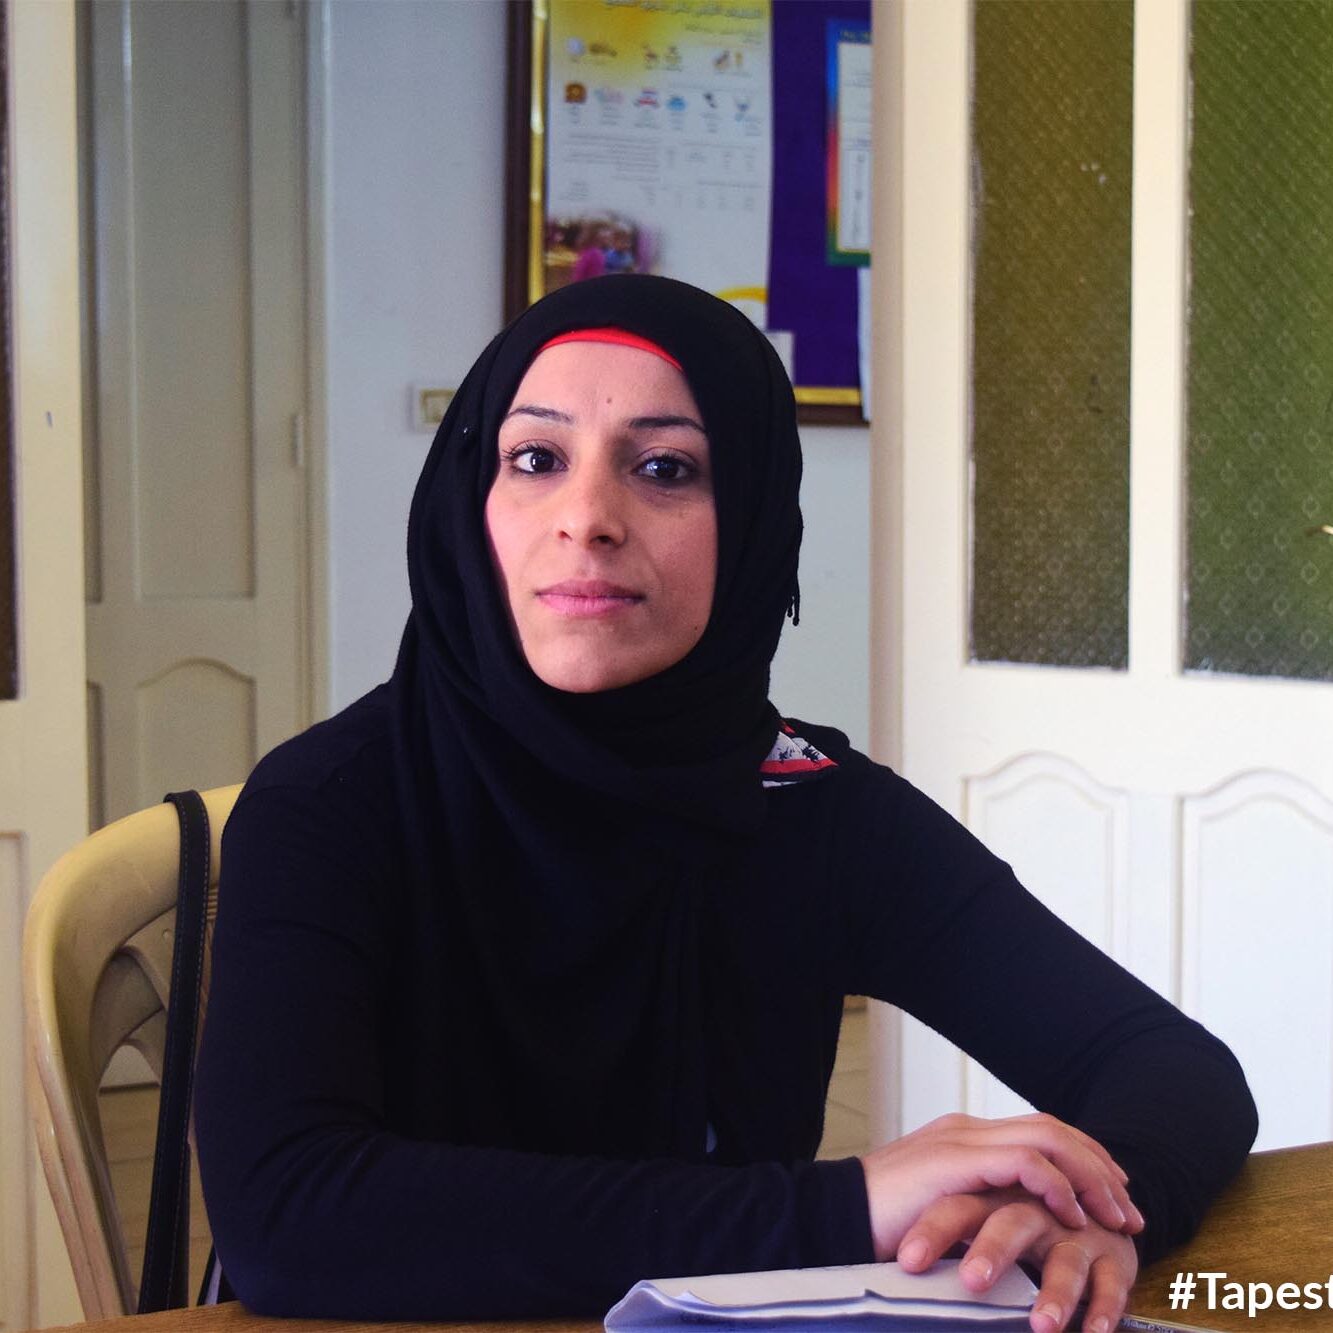 “We need to make sure that every refugee child gets an education, every refugee family has a decent place to live, and that every refugee adult can work or learn new skills to make a positive contribution to their community.” - Rouba, 31-year-old Palestinian refugee (Beddawi Camp, Lebanon)